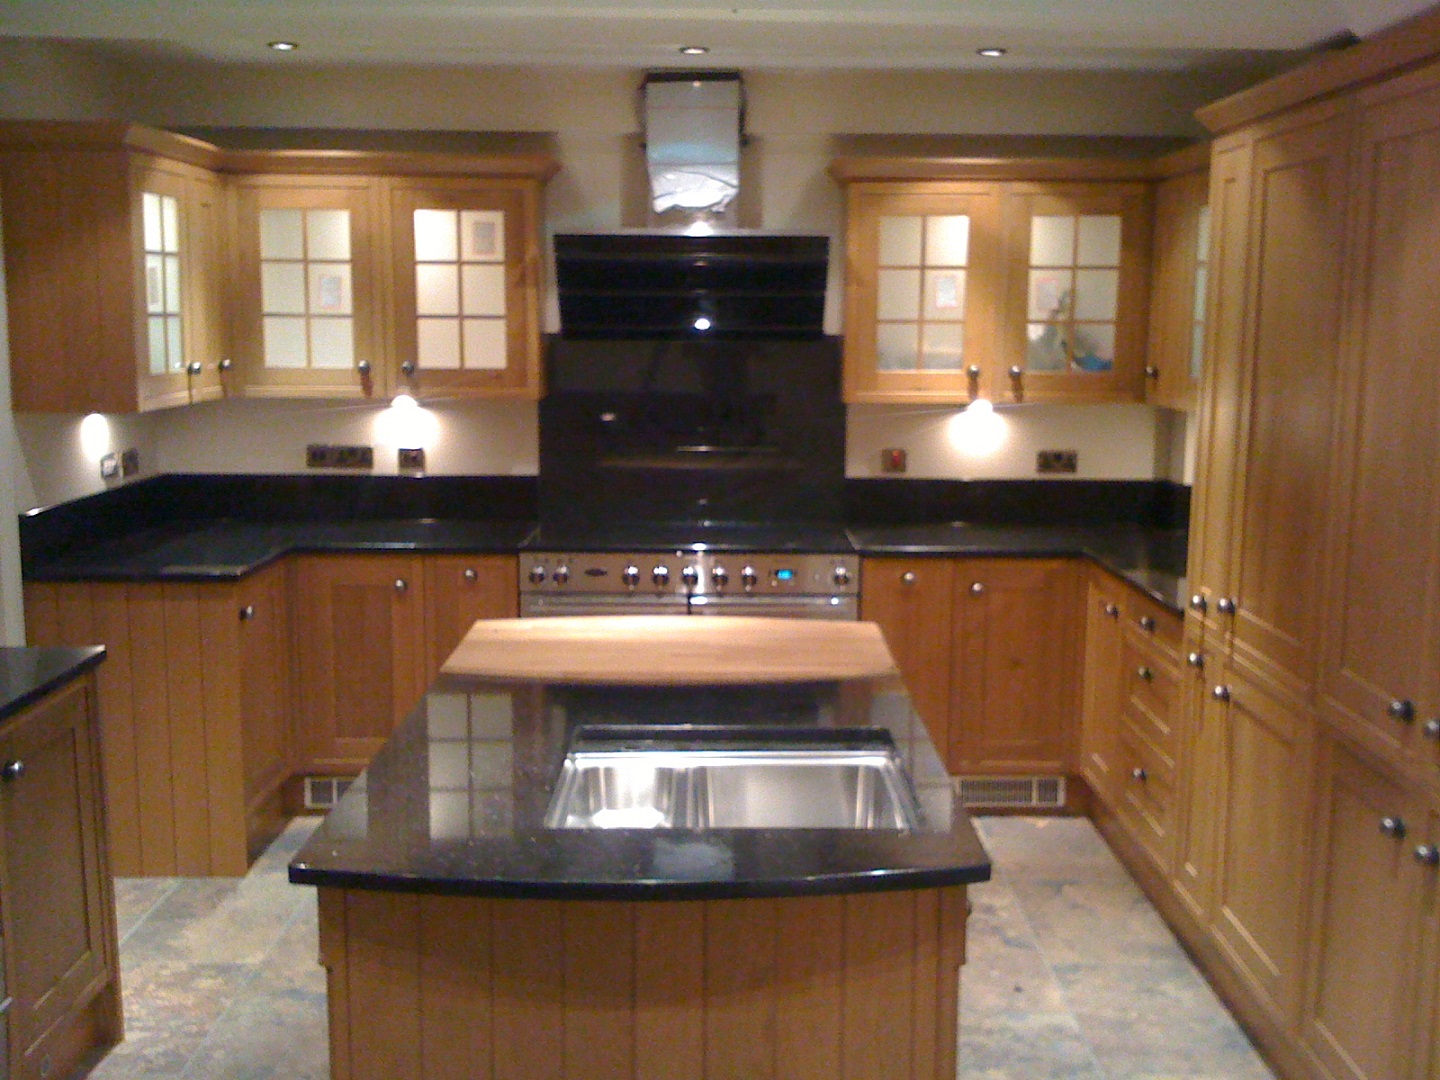 We supply Granite and Quartz Worktops in the lancashire Area. We supply Granite and Quartz Worktops in the Accrington Area. We supply Granite and Quartz Worktops in the Bacup Area. We supply Granite and Quartz Worktops in the Burnley Area. We supply Granite and Quartz Worktops in the Chorley Area. We supply Granite and Quartz Worktops in the Clitheroe Area. We supply Granite and Quartz Worktops in the Fleetwood Area. We supply Granite and Quartz Worktops in the Great-Harwood Area. We supply Granite and Quartz Worktops in the Haslingden Area. We supply Granite and Quartz Worktops in the Lancaster Area. We supply Granite and Quartz Worktops in the Leyland Area. We supply Granite and Quartz Worktops in the Lytham-Saint-Annes Area. We supply Granite and Quartz Worktops in the Morecambe Area. We supply Granite and Quartz Worktops in the Nelson Area. We supply Granite and Quartz Worktops in the Ormskirk Area. We supply Granite and Quartz Worktops in the Padiham Area. We supply Granite and Quartz Worktops in the Poulton-le-Fylde Area. We supply Granite and Quartz Worktops in the Preston Area. We supply Granite and Quartz Worktops in the Rawtenstall Area. We supply Granite and Quartz Worktops in the Skelmersdale Area. We supply Granite and Quartz Worktops in the Thornton-Cleveleys Area.